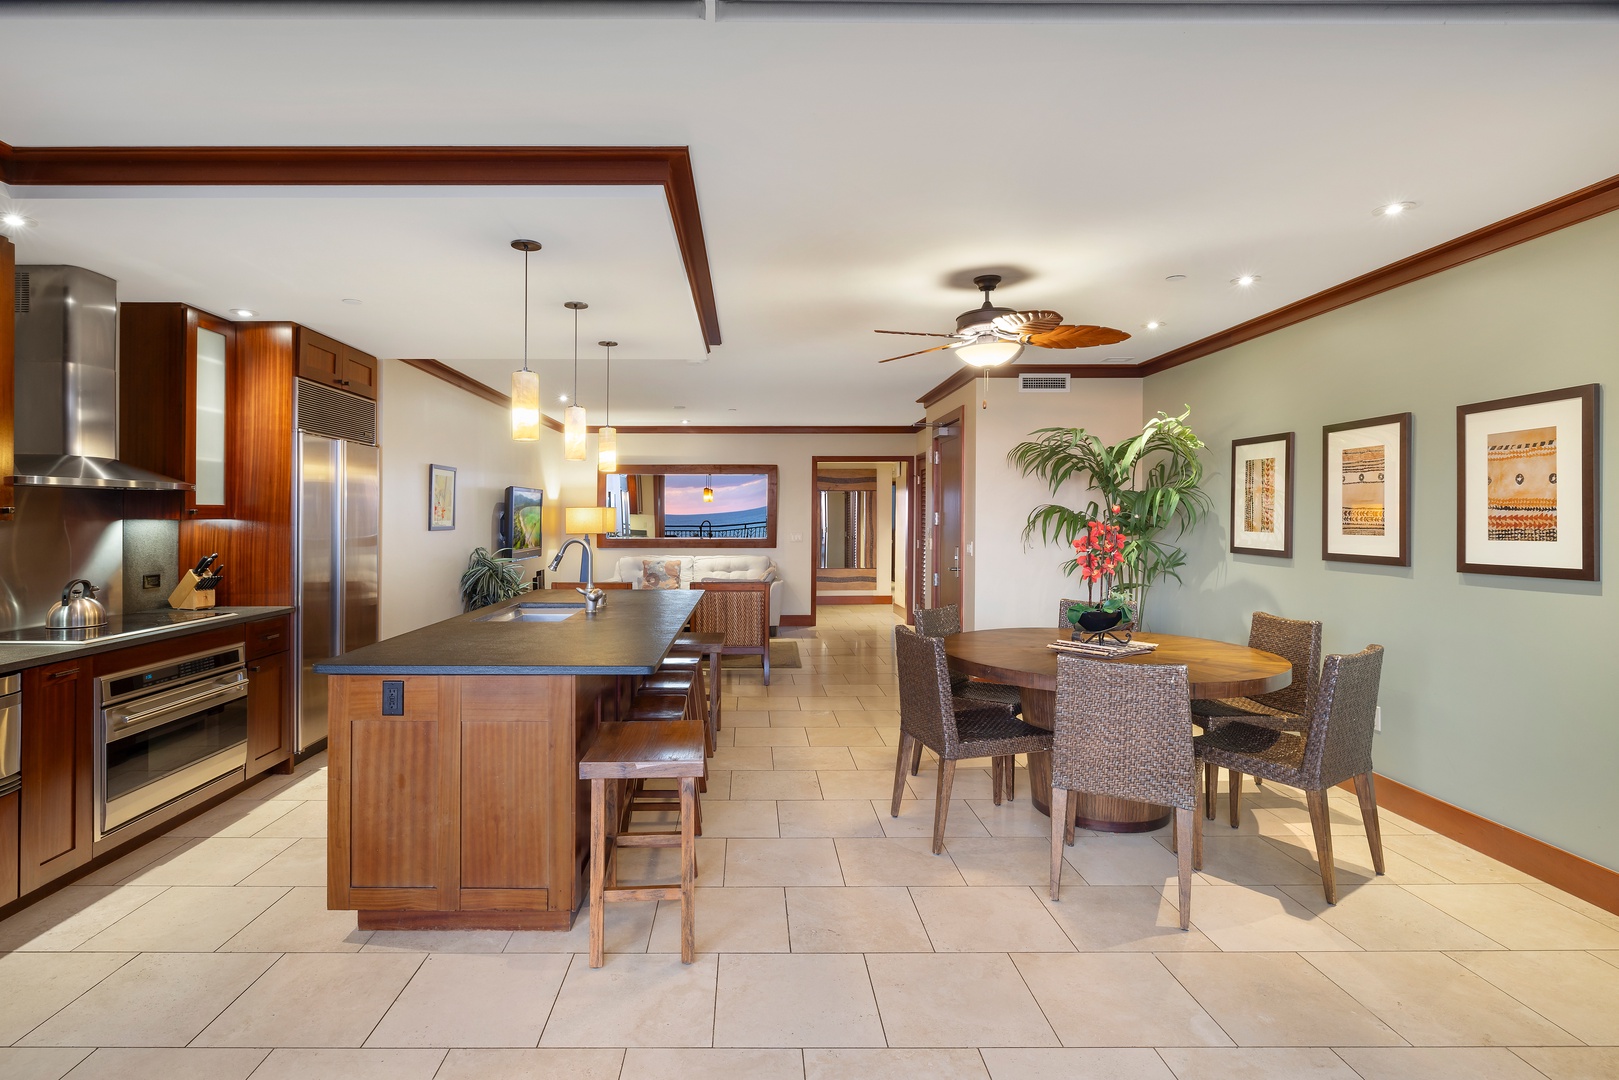 Kapolei Vacation Rentals, Ko Olina Beach Villas O1006 - Modern kitchen and dining area with a glimpse into the inviting living room beyond.